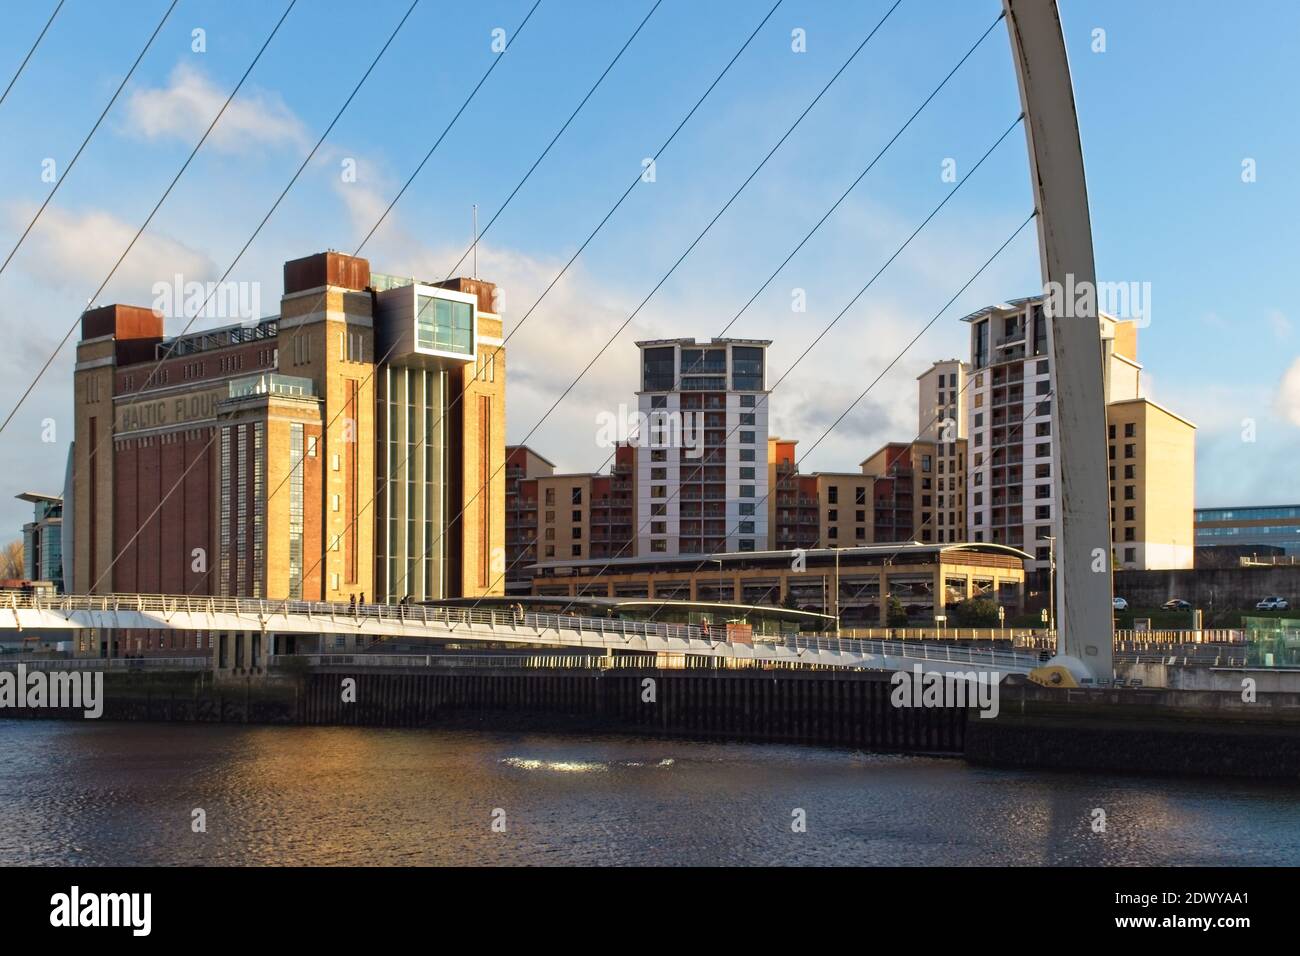 The Gateshead Millennium Bridge spans the River Tyne from Newcastle to the old Baltic Flour Mill building. Stock Photo